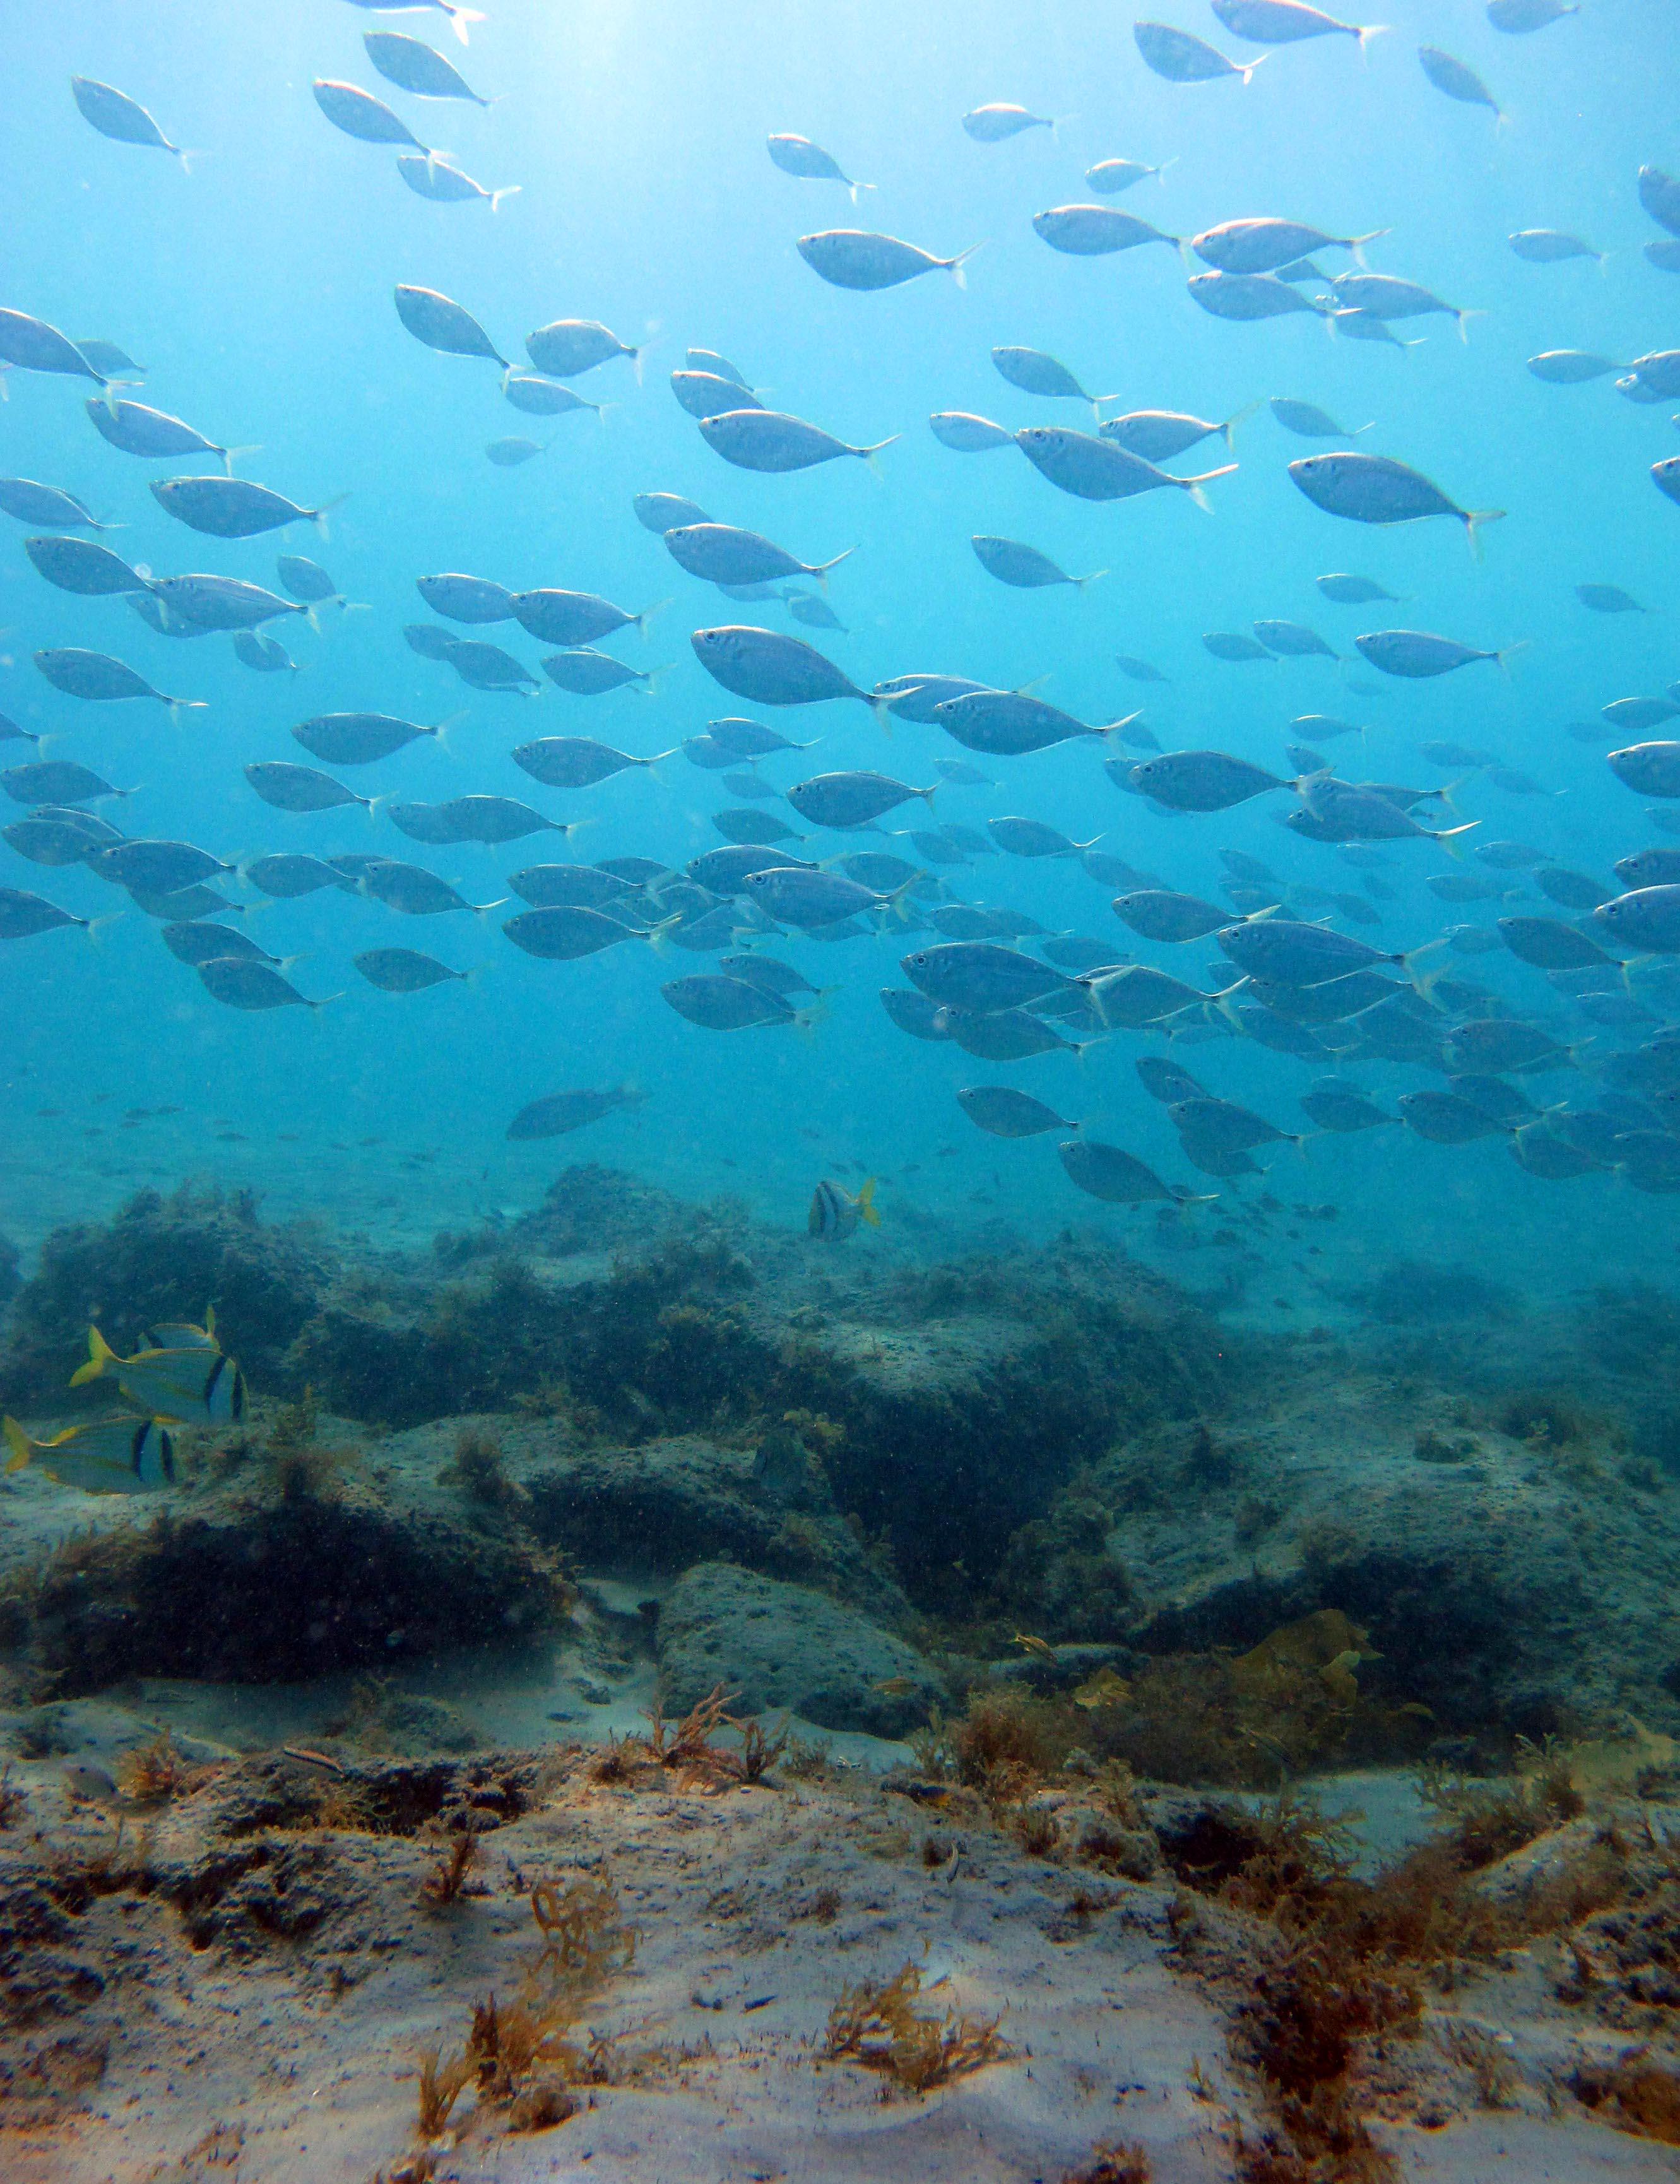 A school of fish above a coral reef